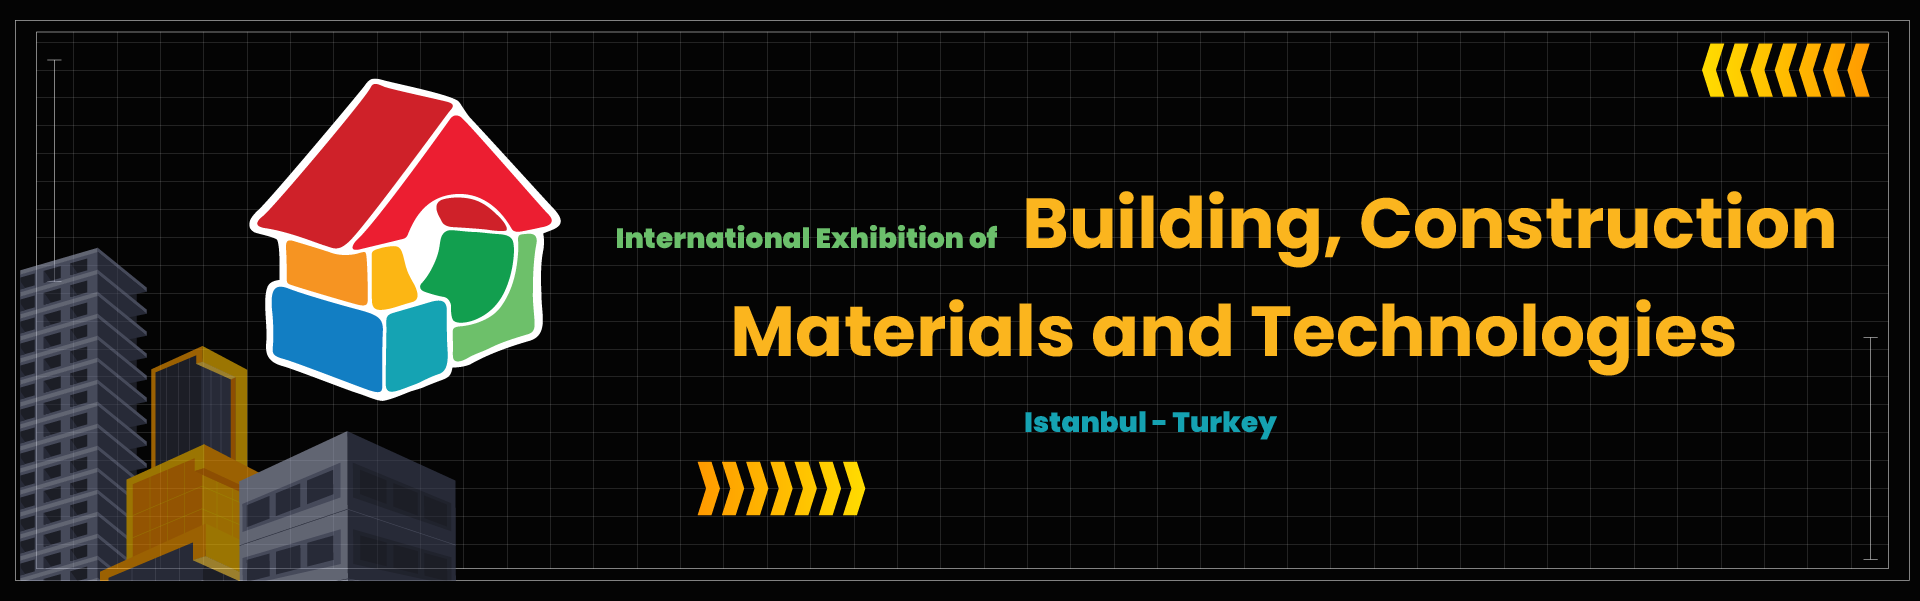 Building and Construction Materials Exhibition Istanbul Turkey